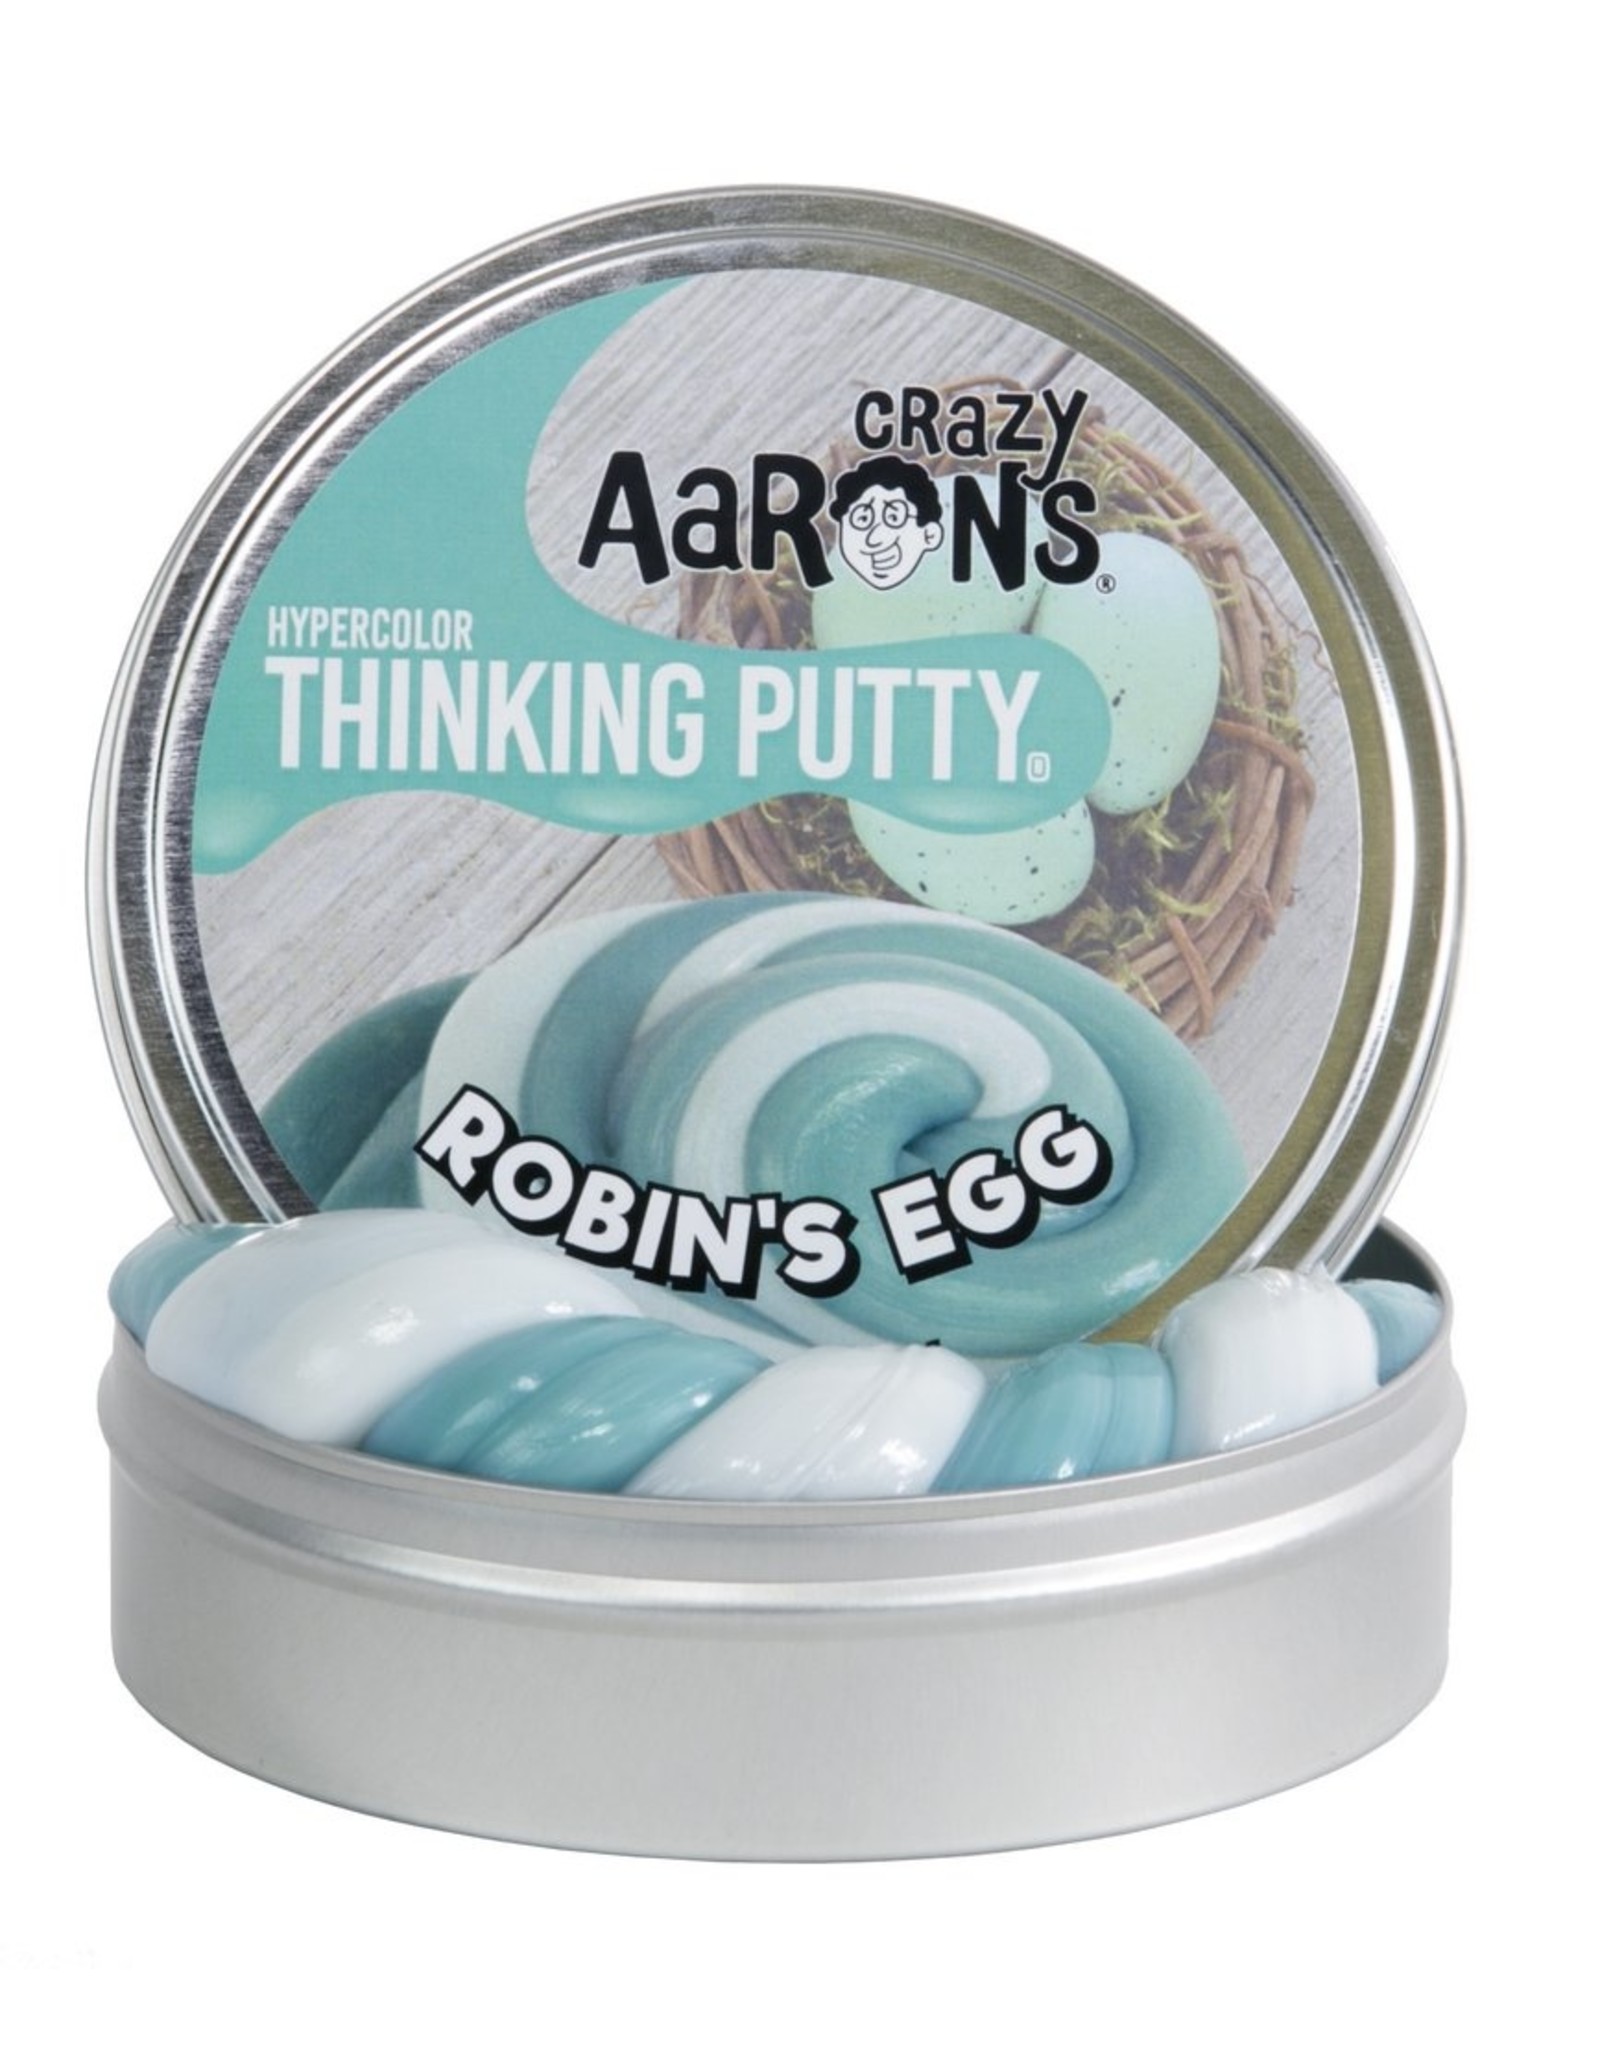 teal thinking putty